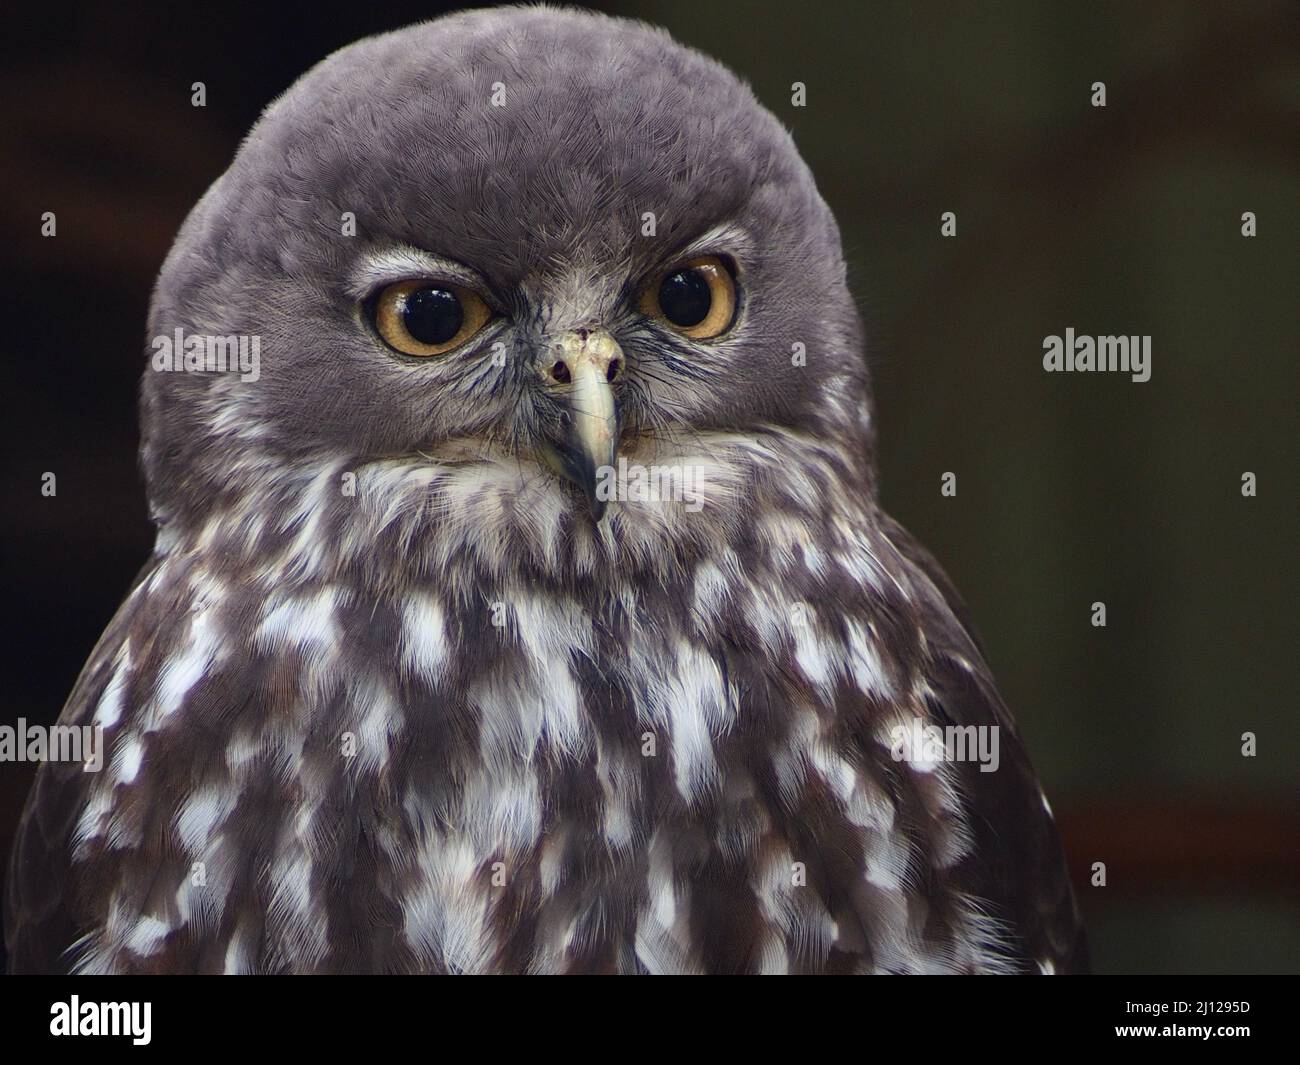 Magnificent dignified regal Barking Owl with impeccable plumage. Stock Photo